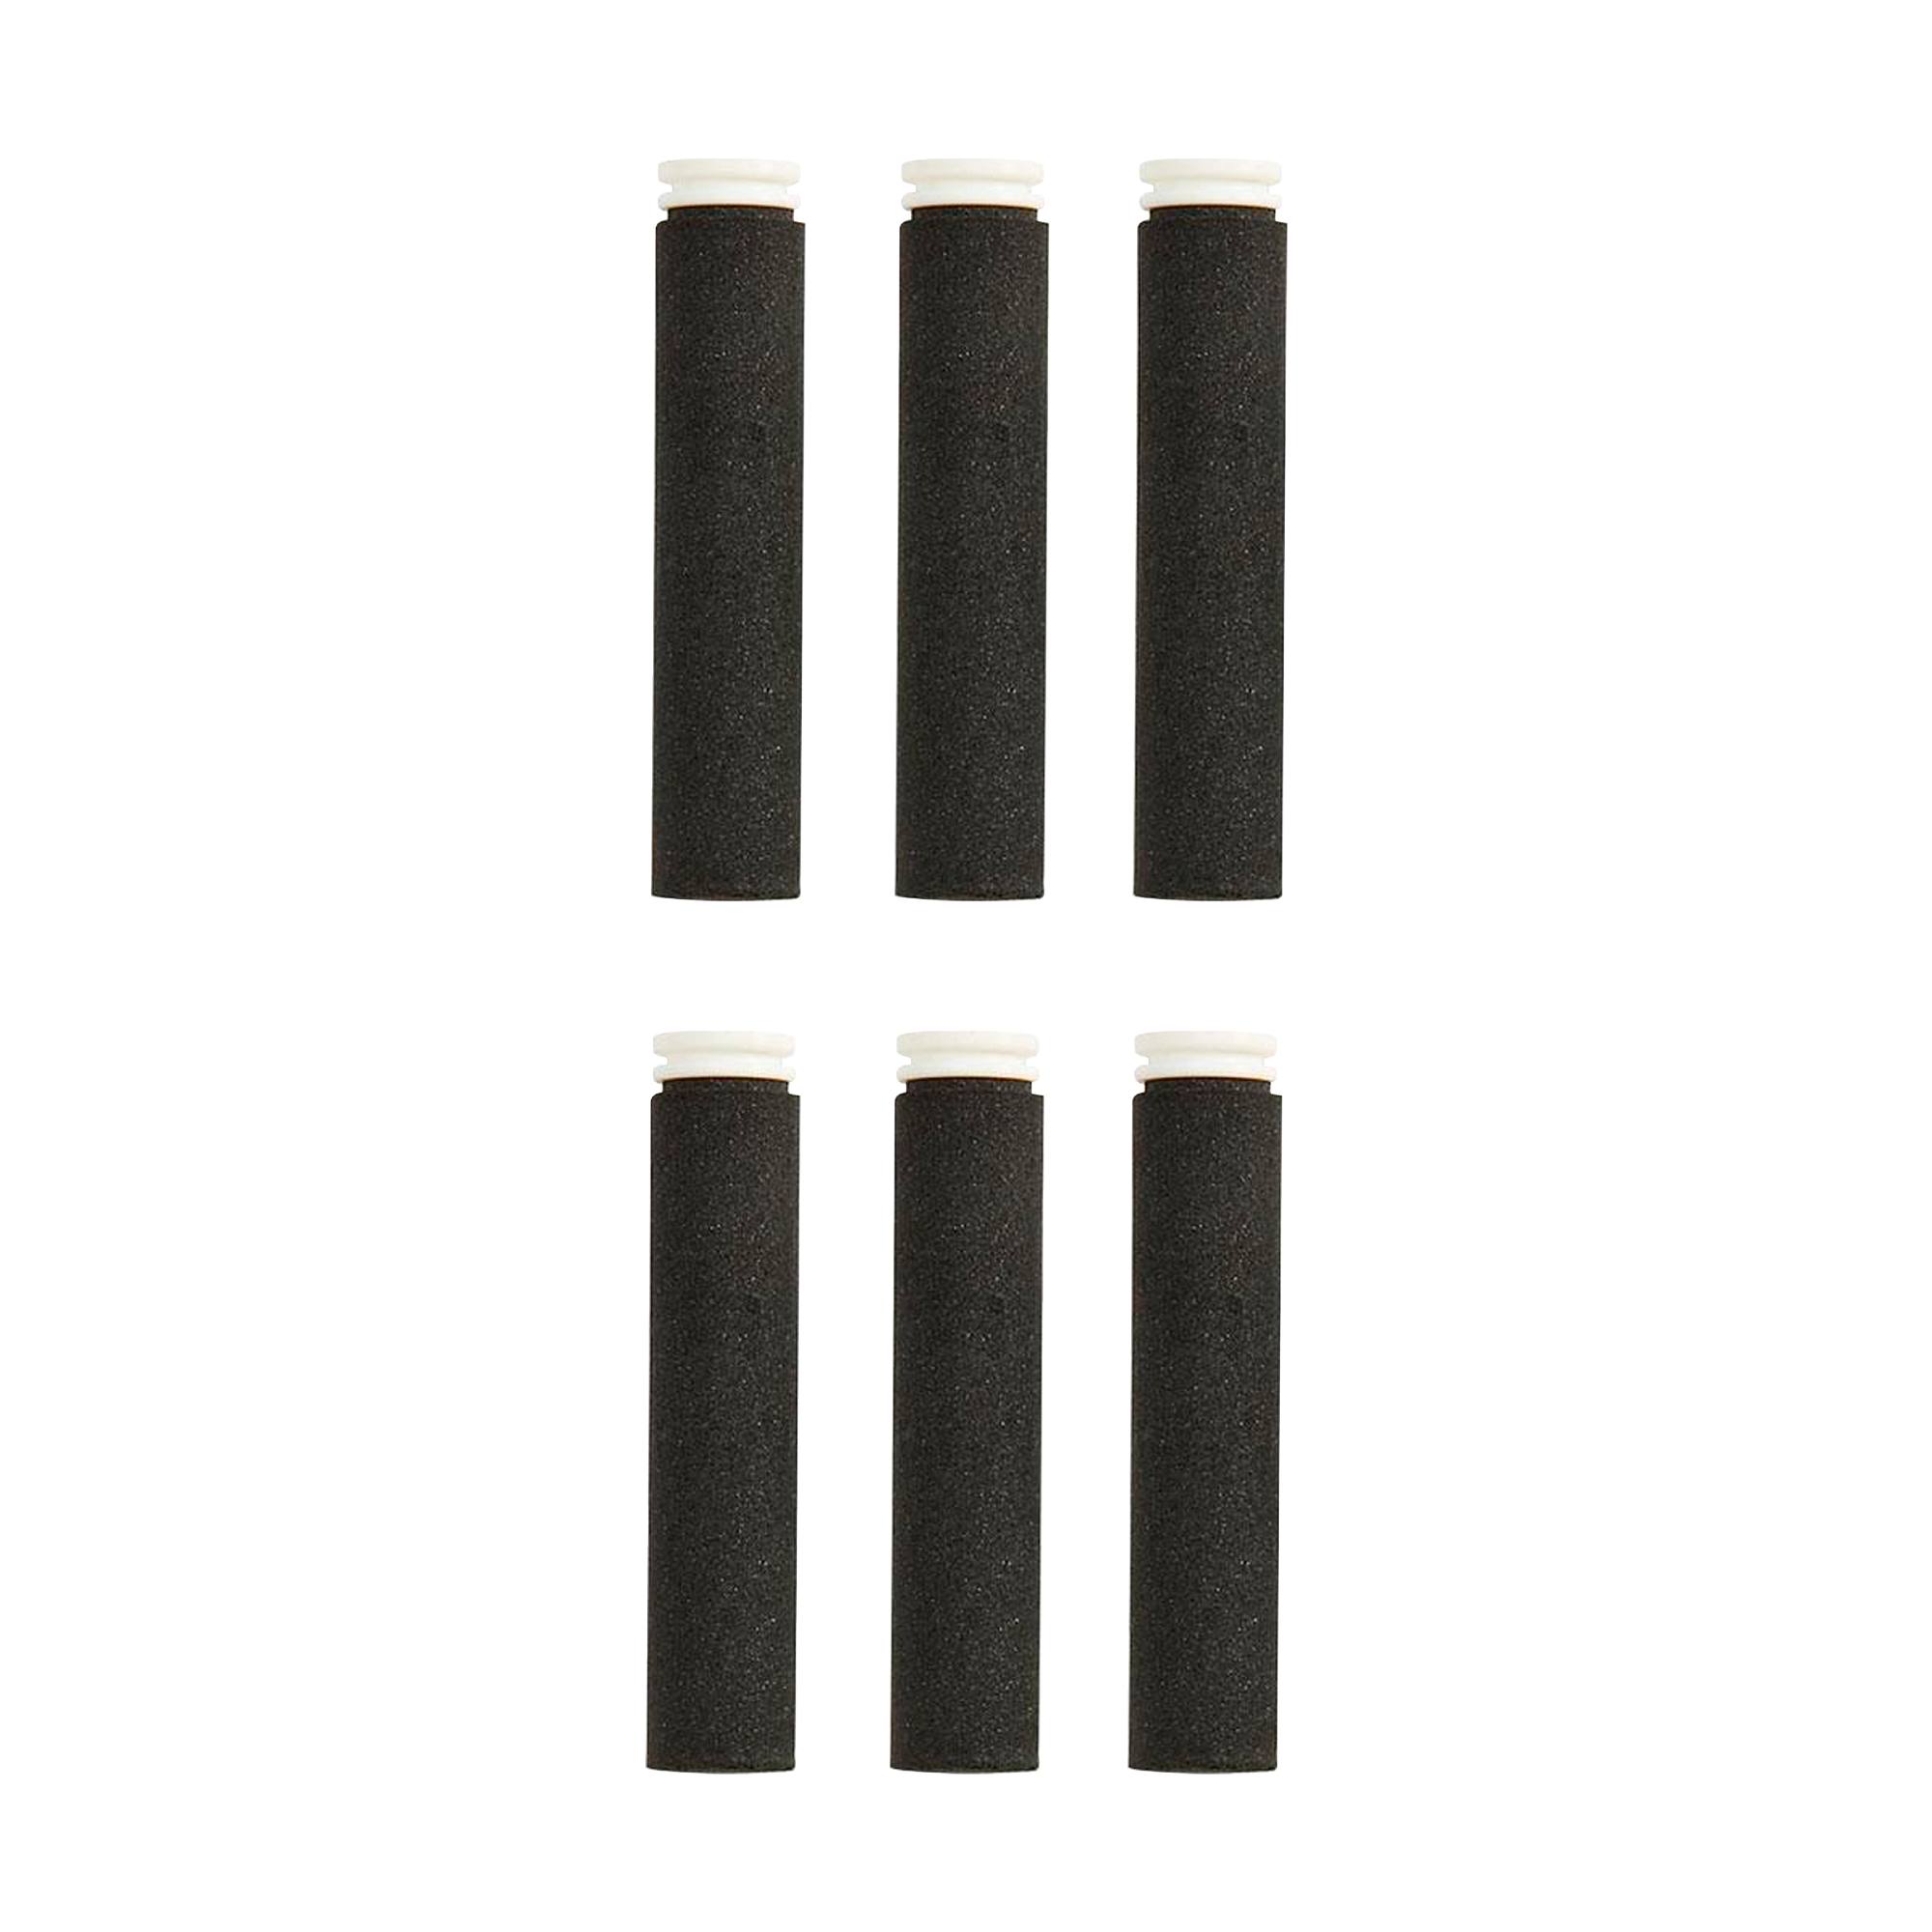 CamelBak Groove Replacement Filter 6 Pack